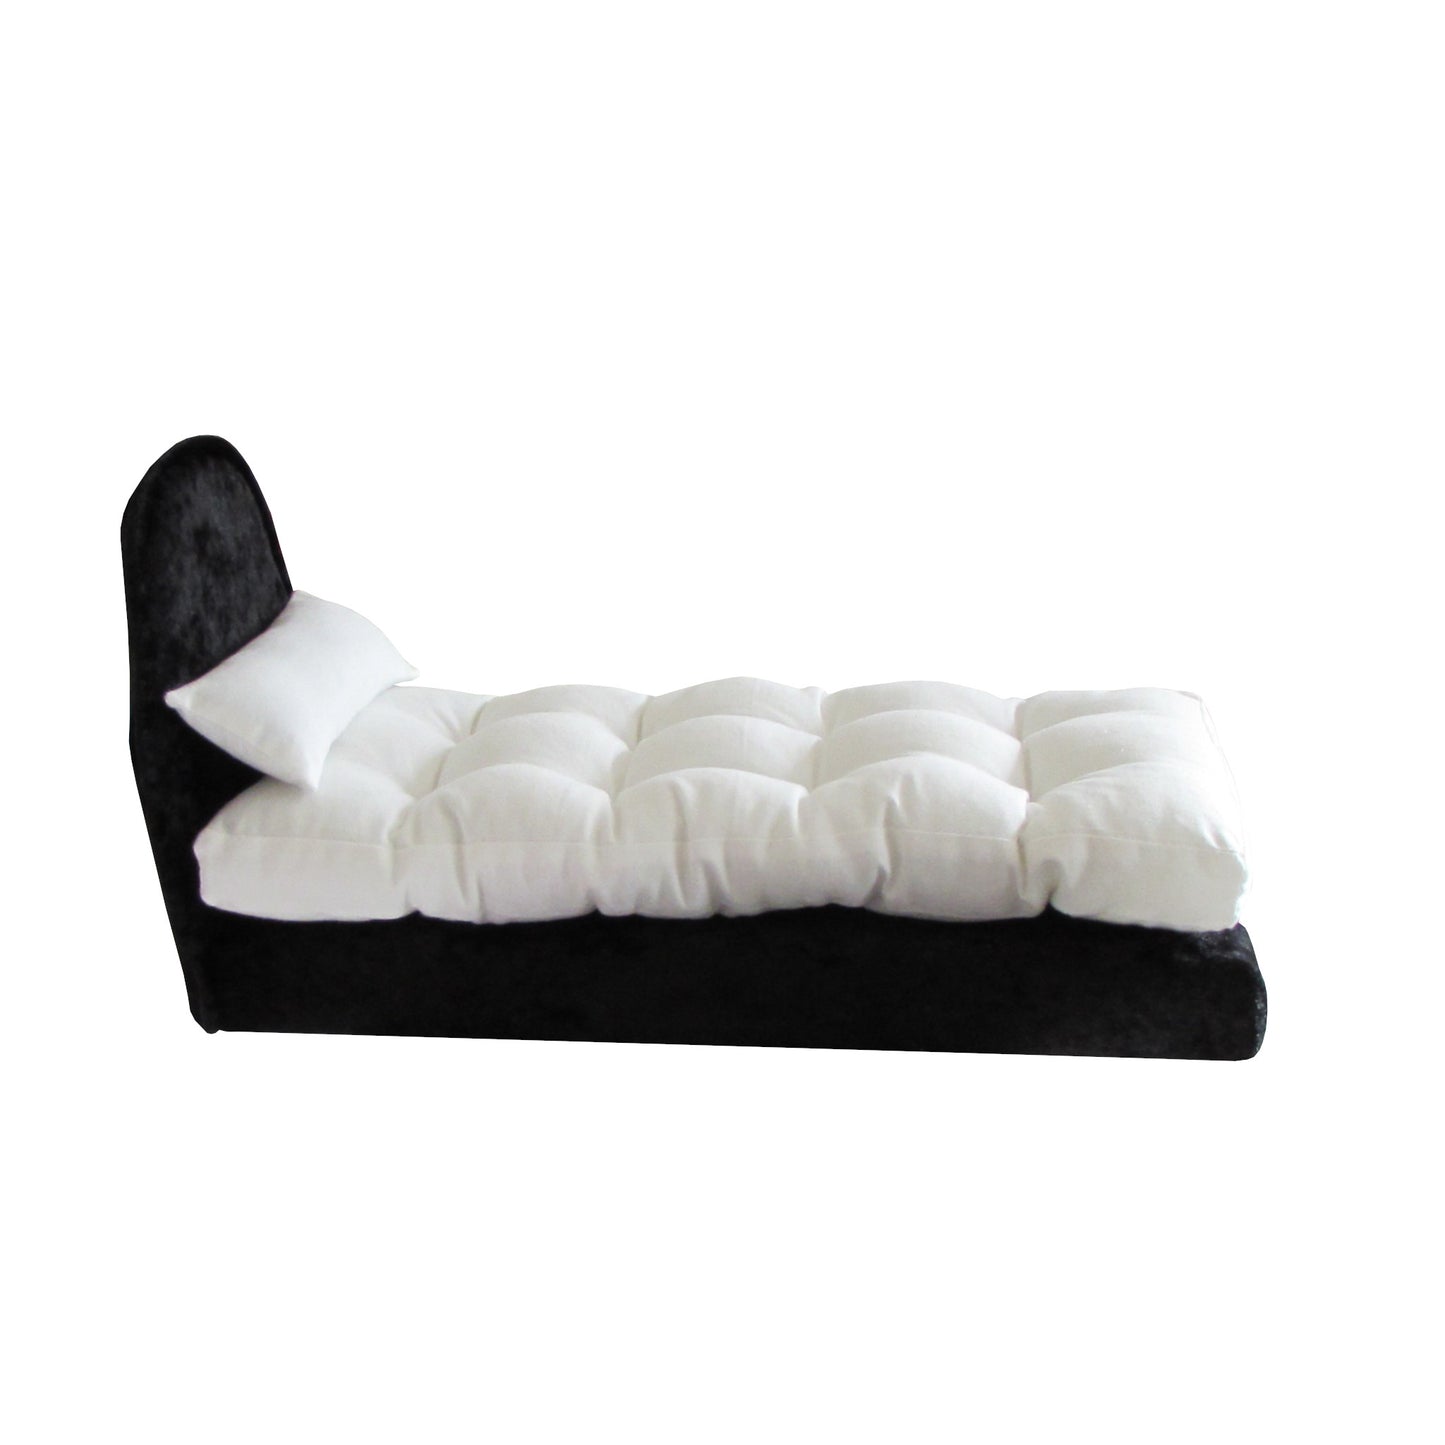 Black Crushed Velvet Doll Bed, Pillow, and Mattress for 11.5-inch and 12-inch dolls